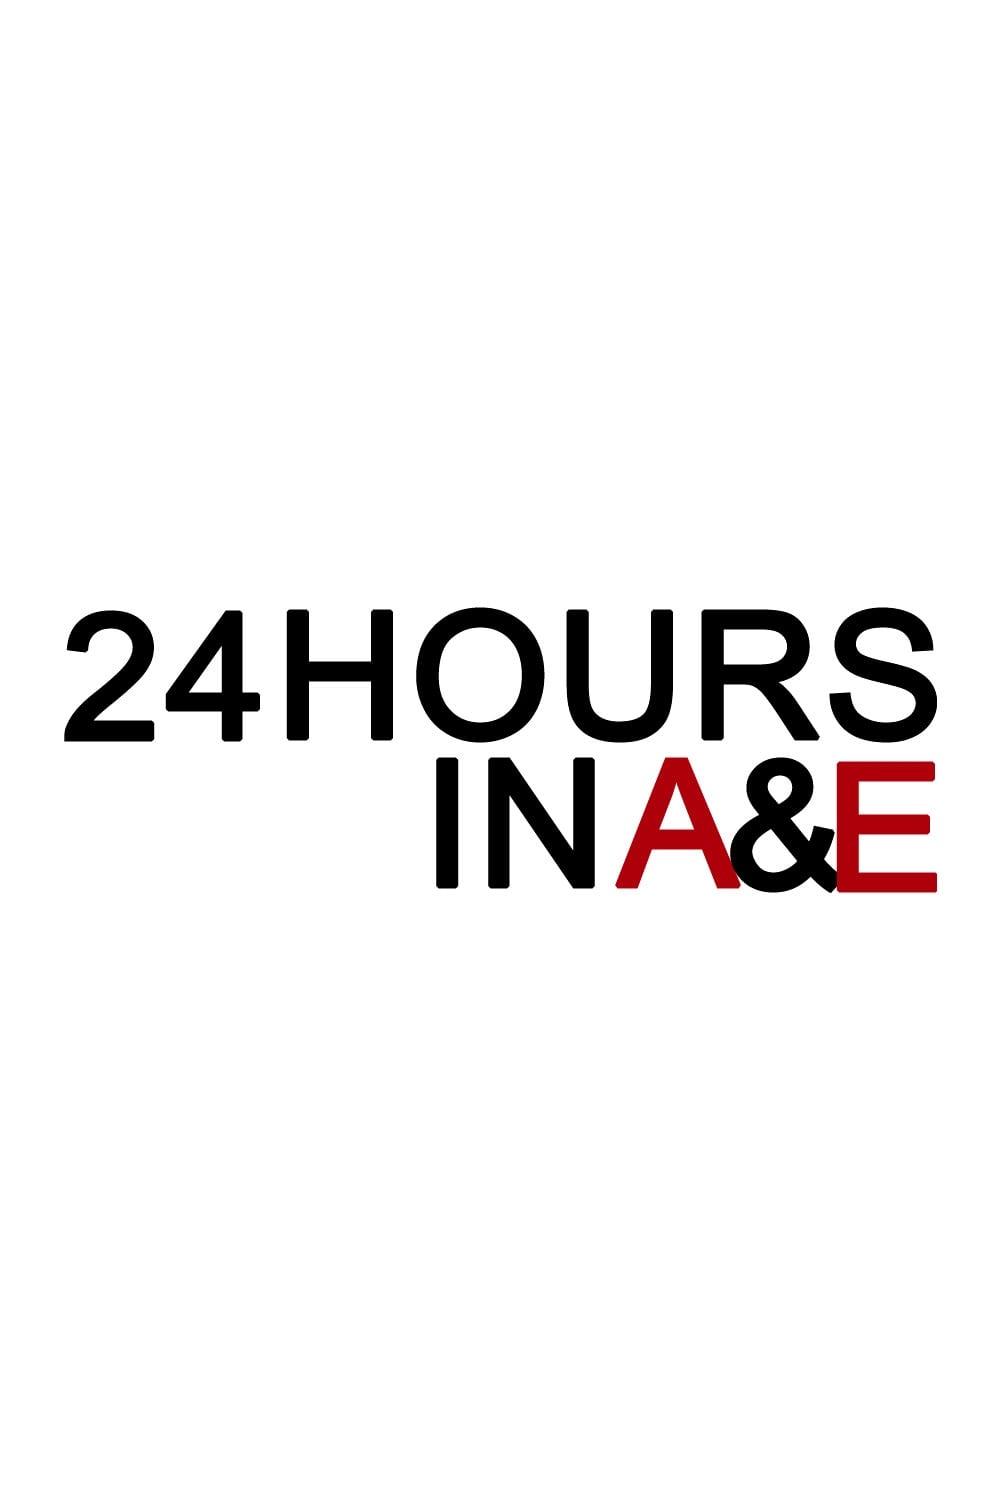 24 Hours in A&E poster